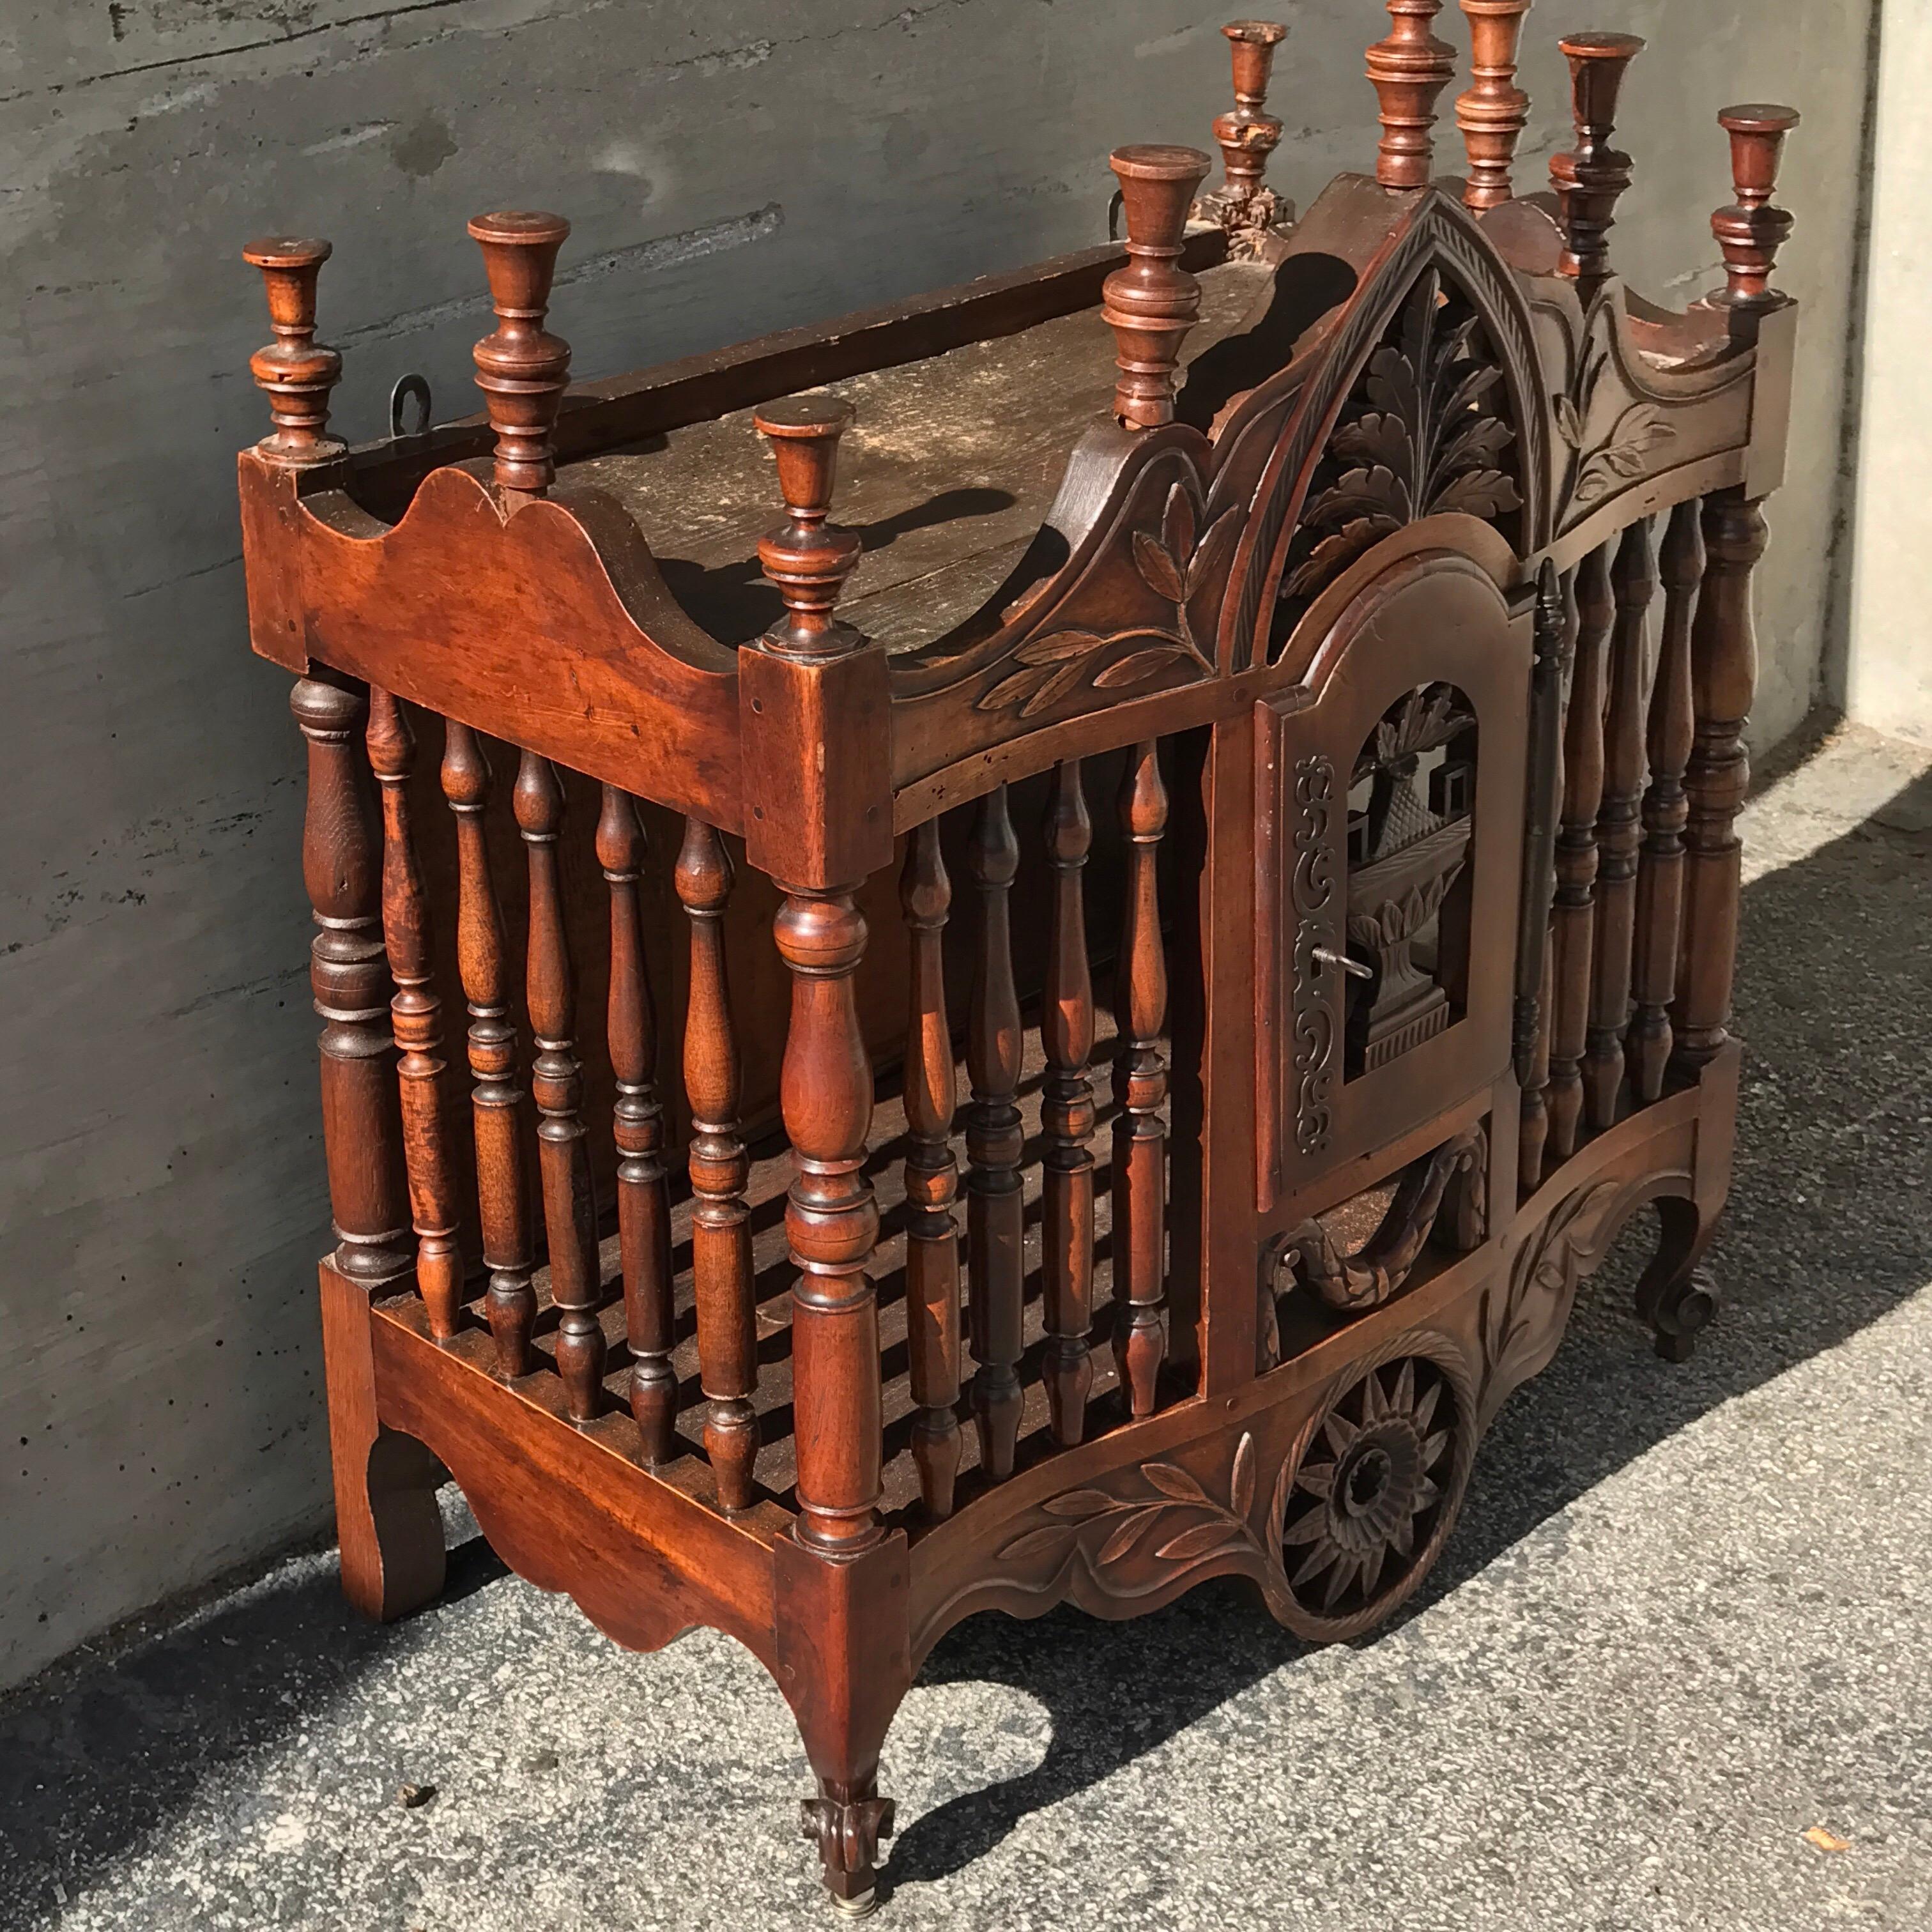 Antique French carved walnut Panetiere, of typical form with finial crown top, and working key. Better than most, fresh from a Palm Beach Estate.